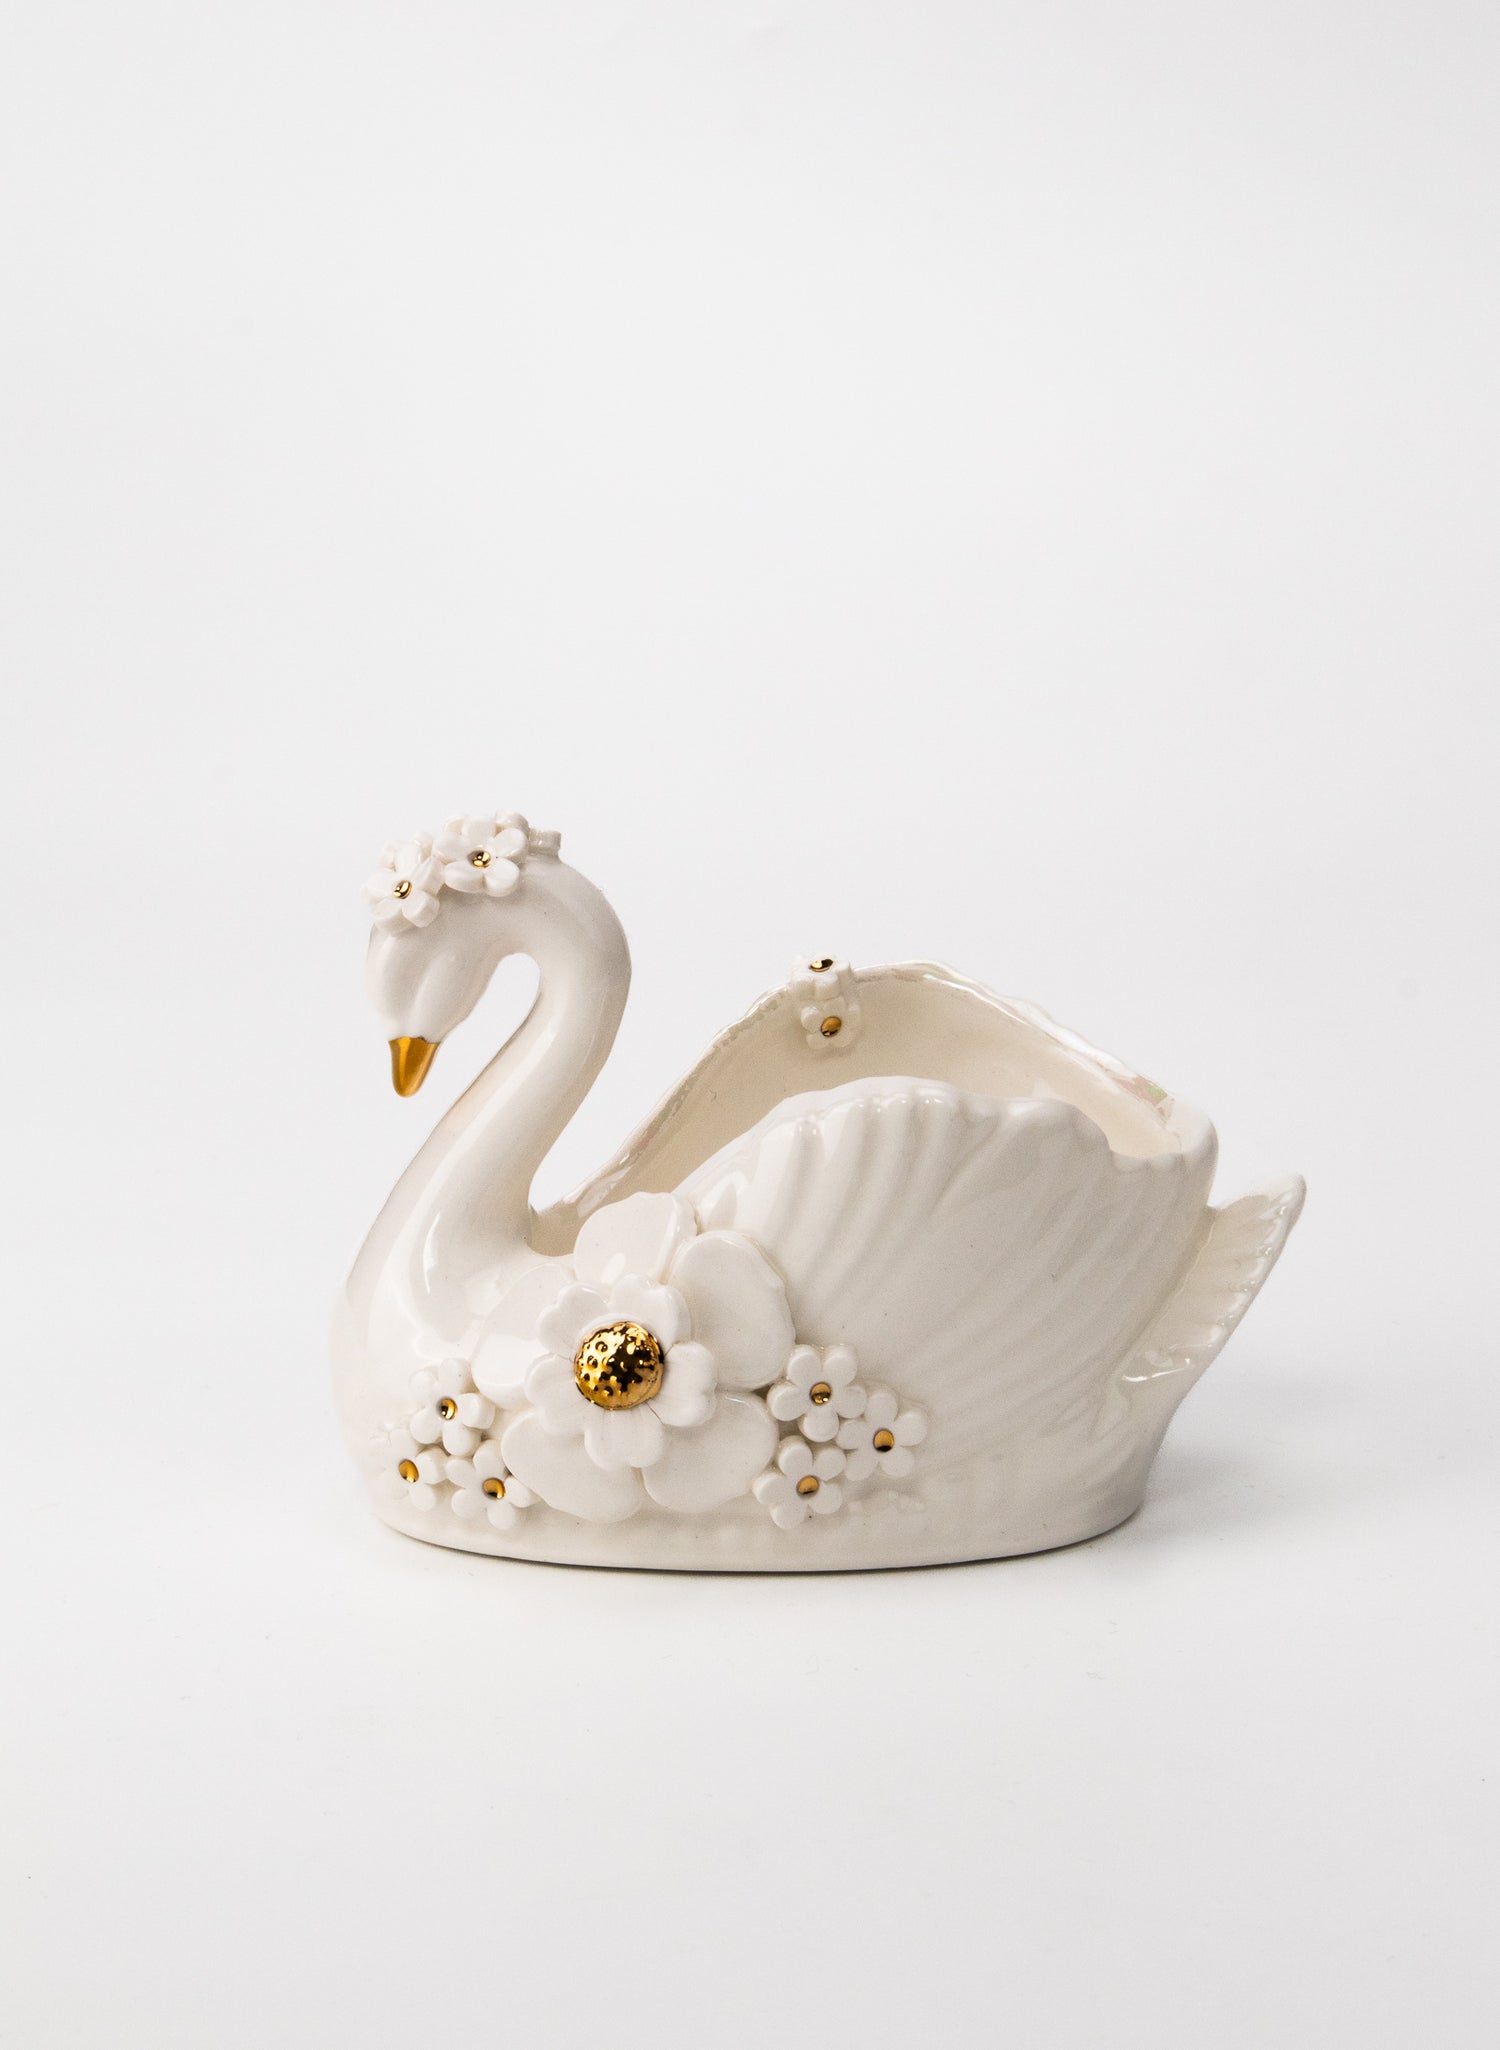 Small White Swan with Gold and White Flowers